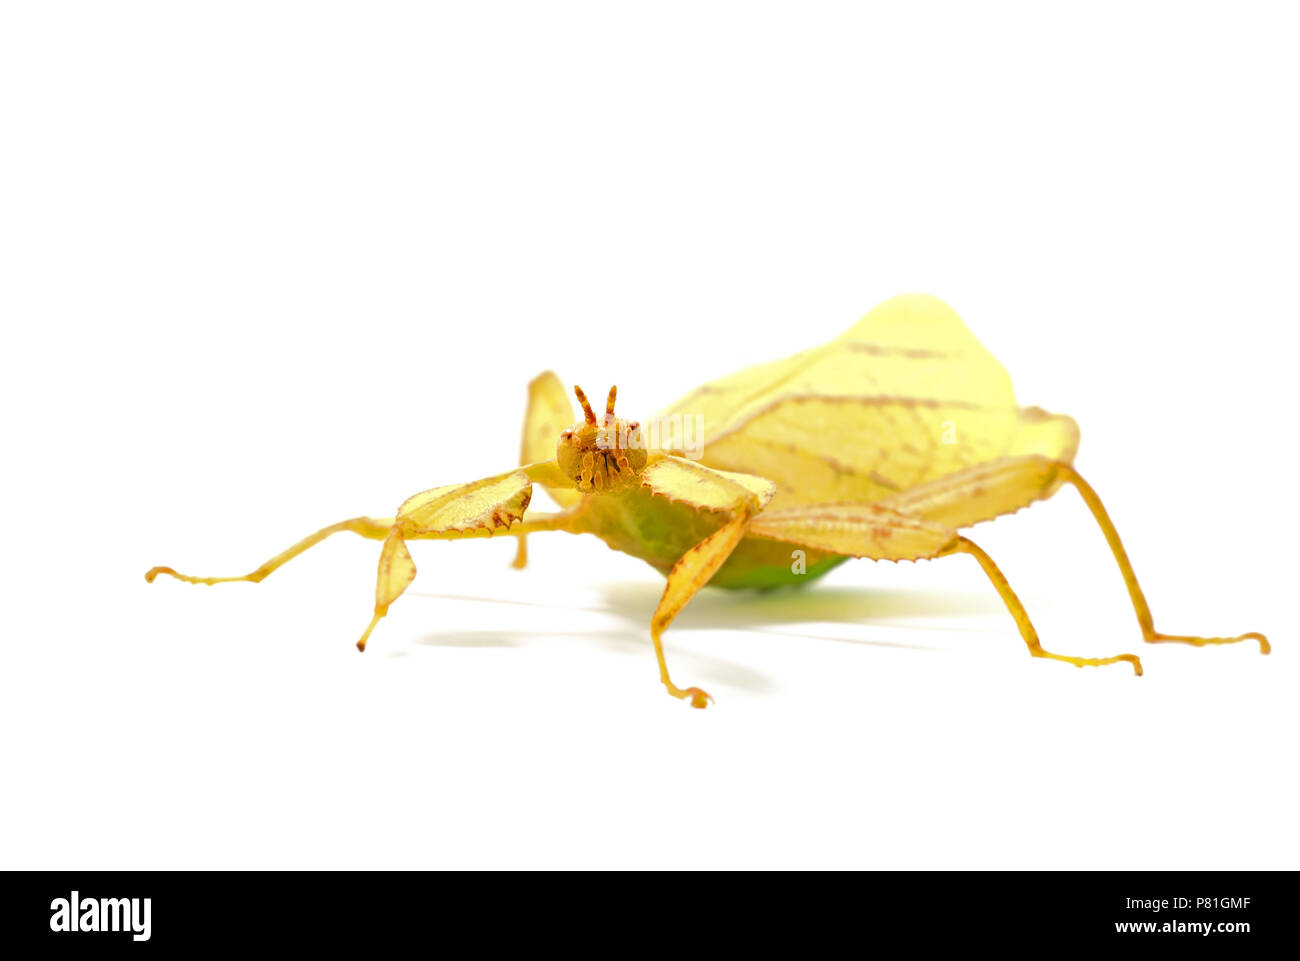 Phyllium philippinicum, aka Leaf Insect is an insect in the order of stick insects, phasmida, that looks like a leaf and can be kept as a pet. Stock Photo